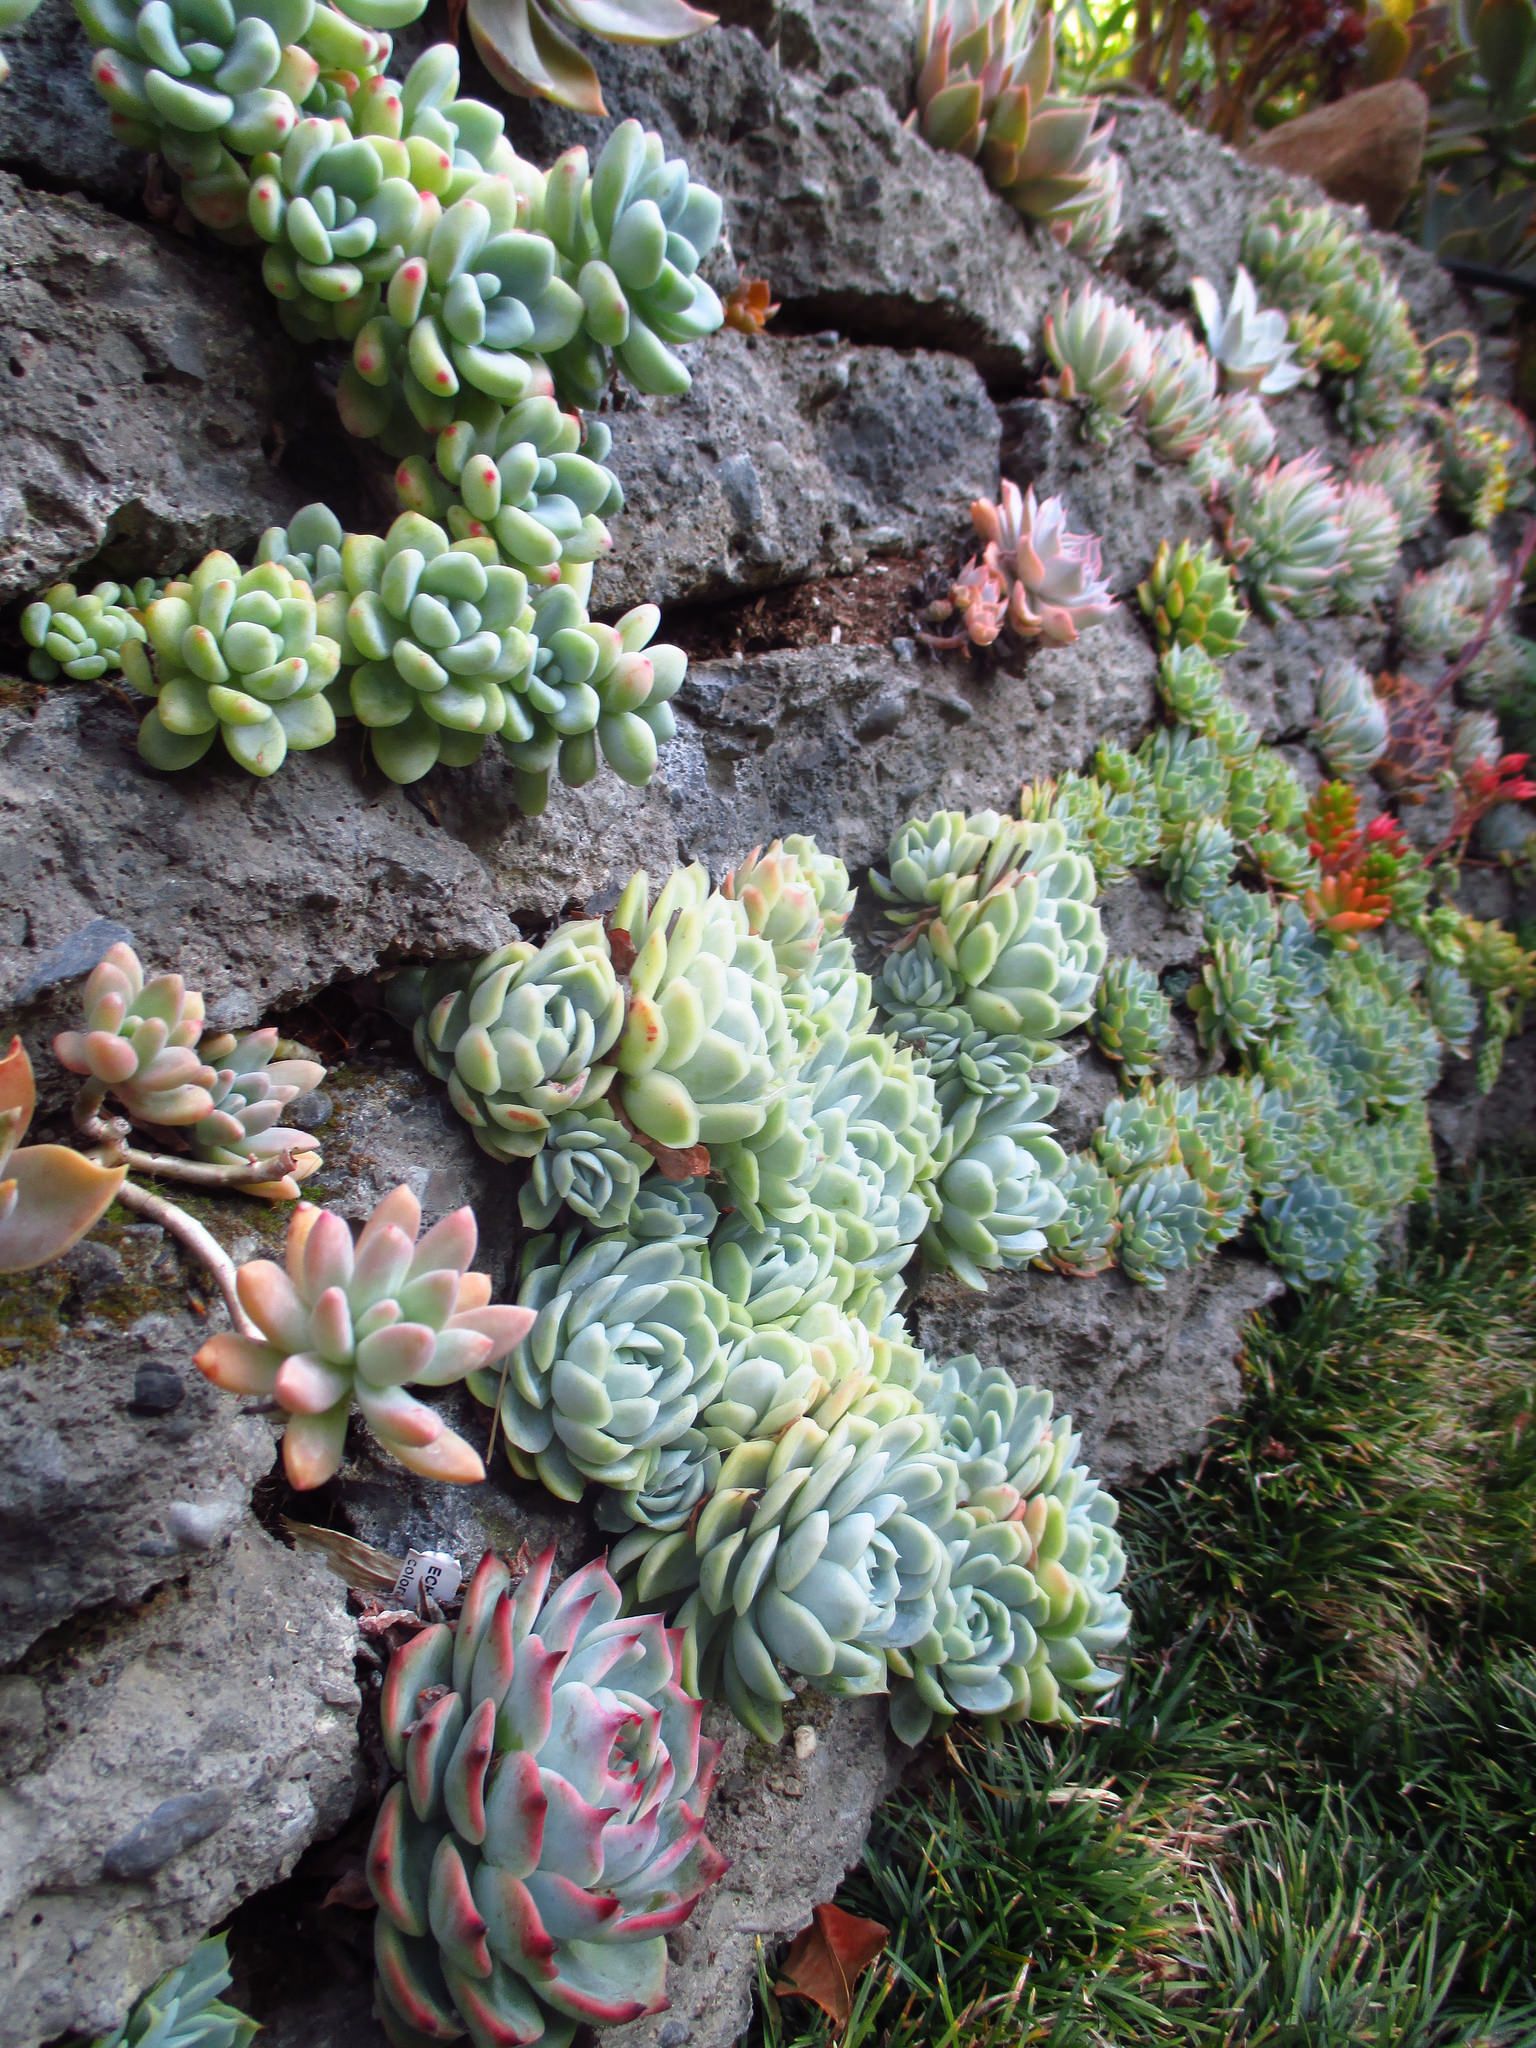 Lush and Diverse: The Beauty of a Succulent Rock Garden